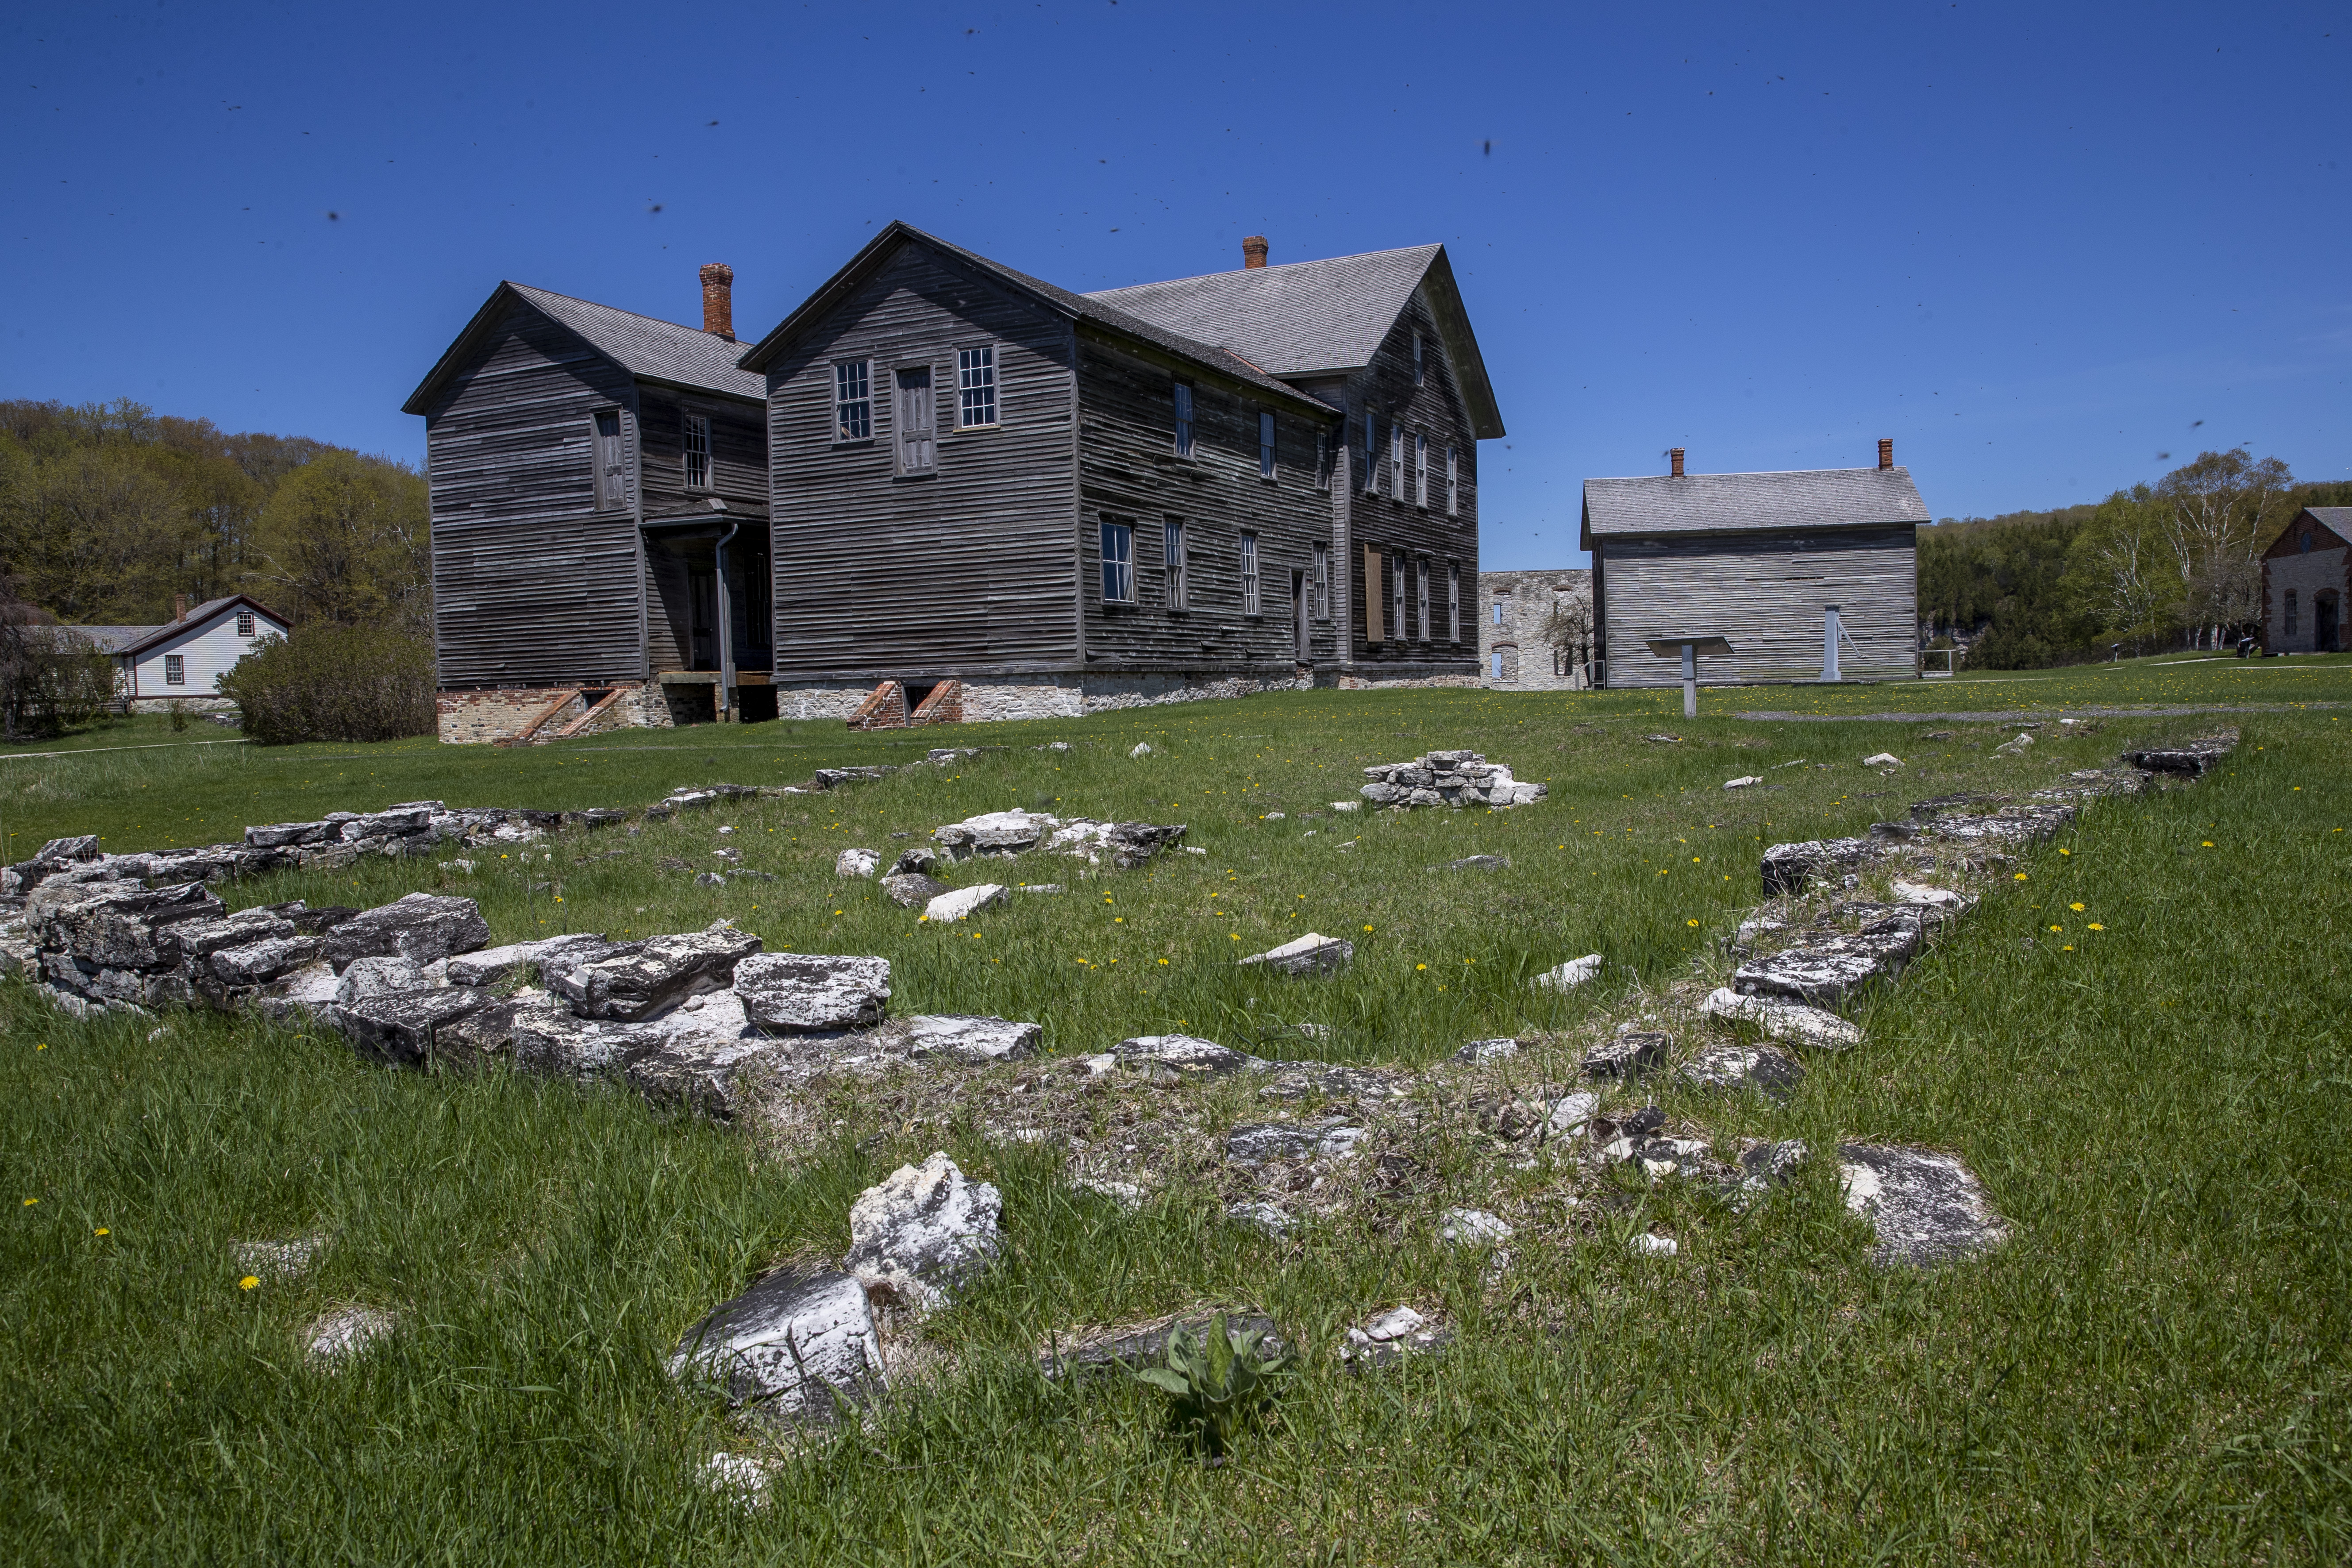 Bugs can be seen in the sky over historic townsite structures at Fayette Historic State Park near Garden on Tuesday, May 17, 2022. The historic townsite manufactured charcoal pig iron between 1867 and 1891. (Cory Morse | MLive.com)
